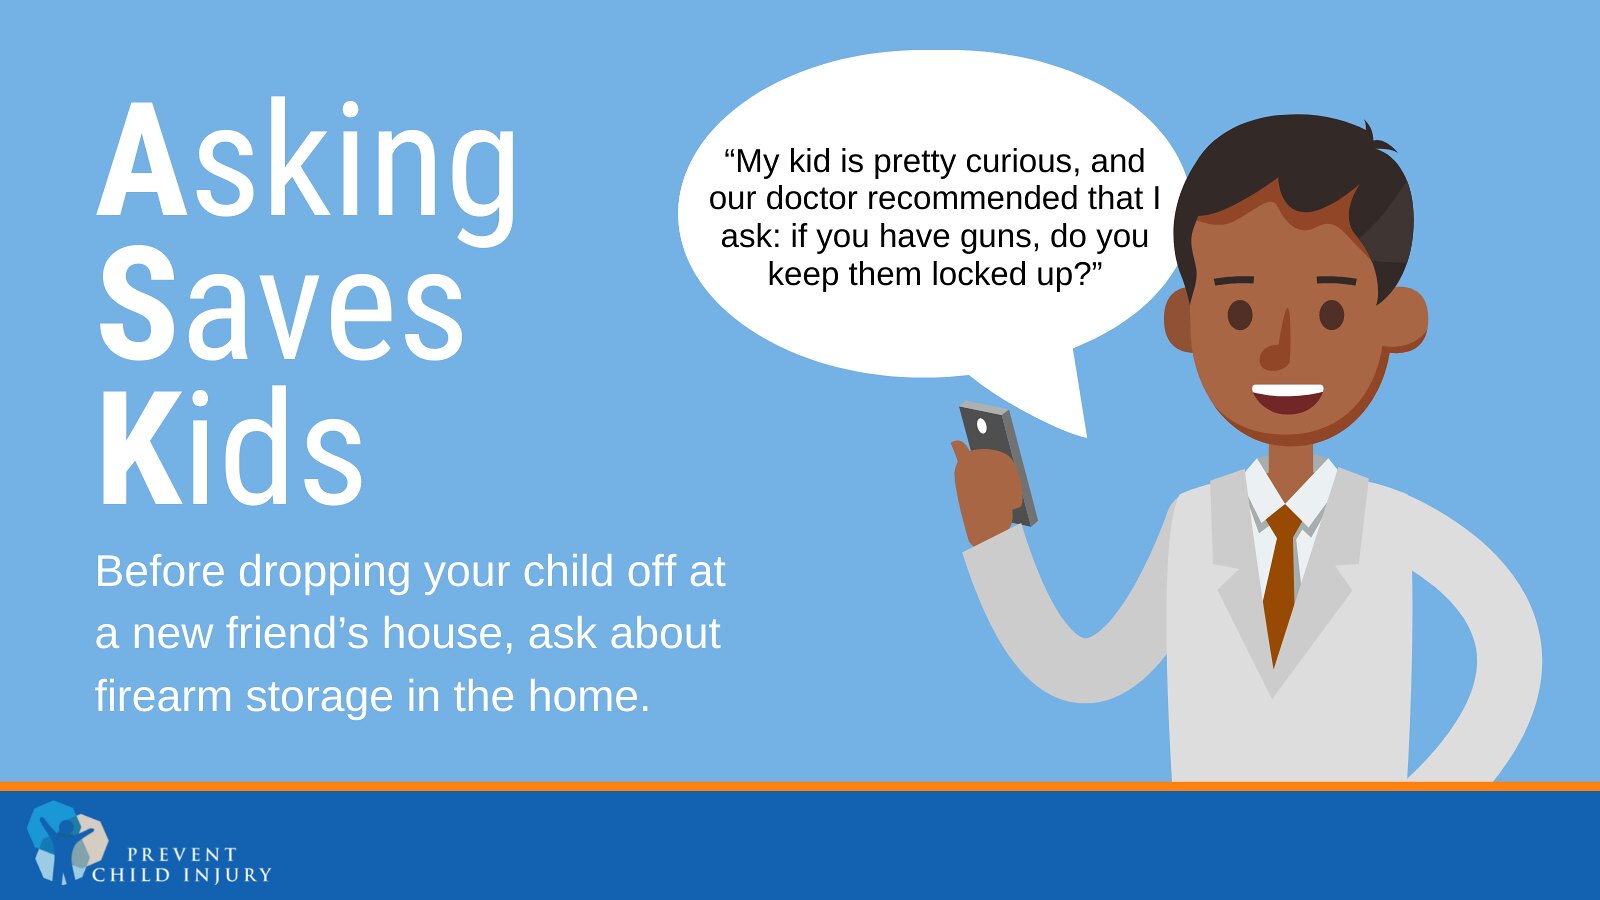 Prevent Child Injury’s infographic “Asking Saves Lives.” Before dropping your child off at a new friend’s house, ask about firearm storage in the home.